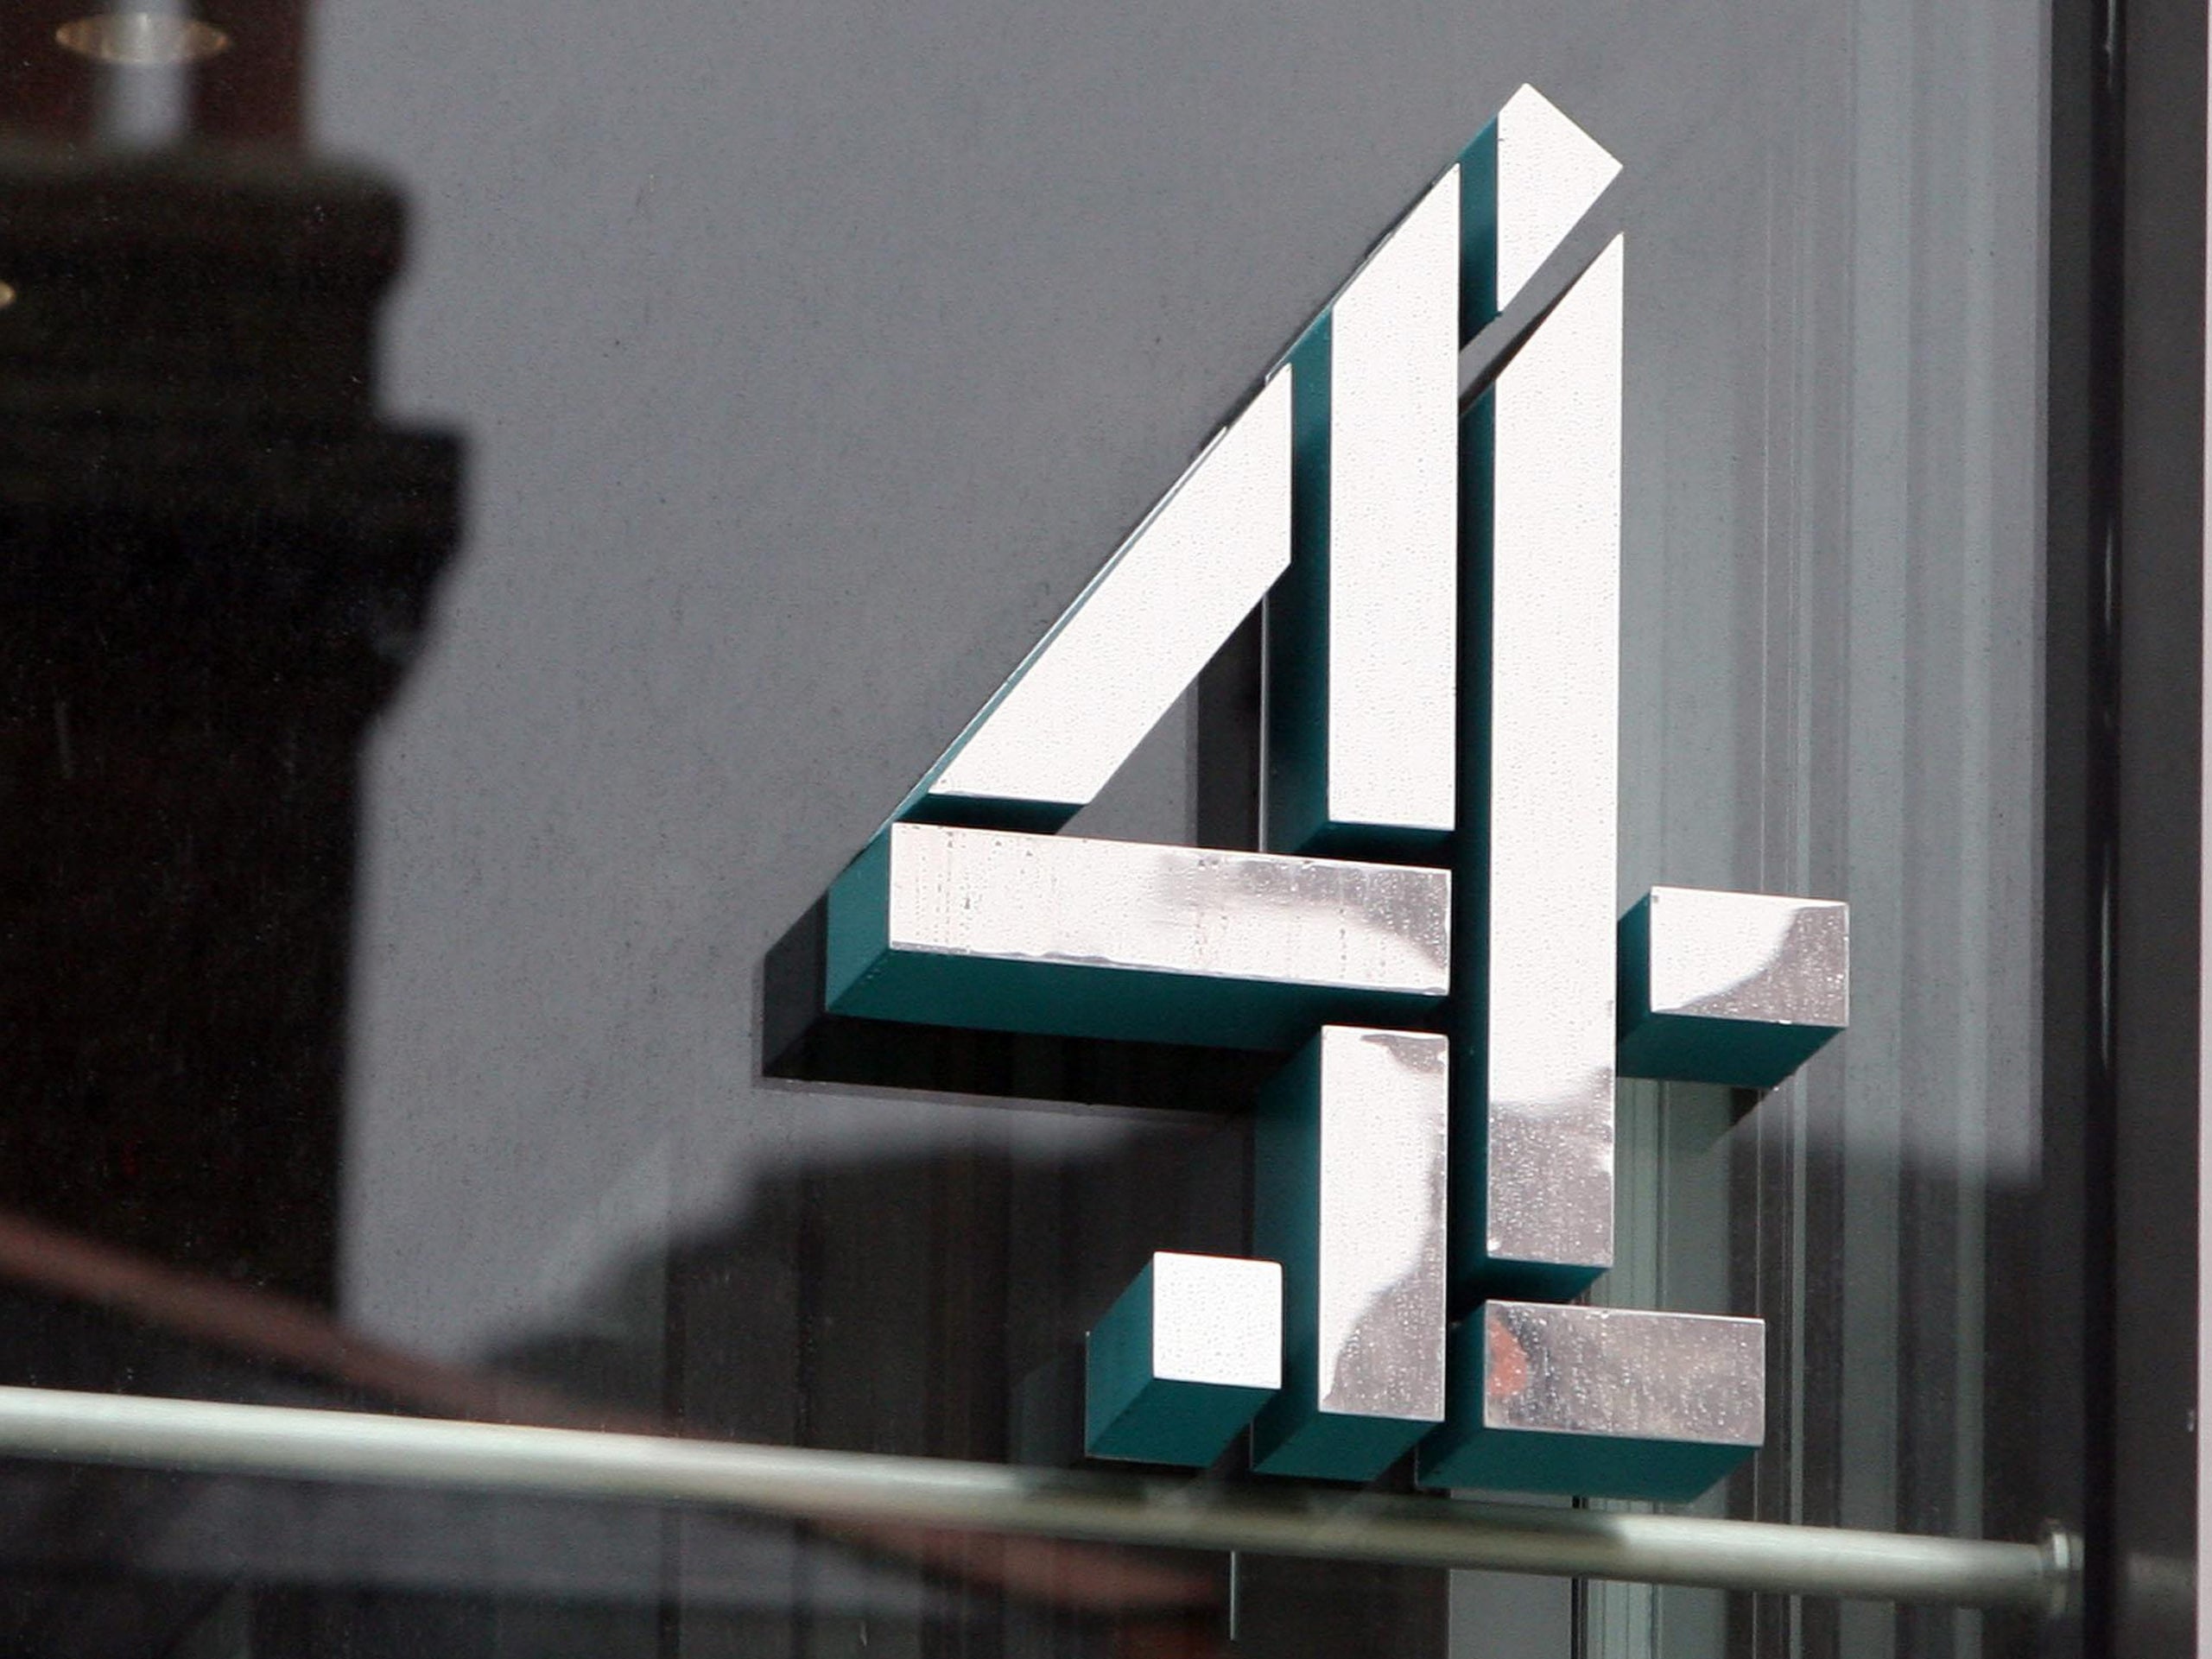 Channel 4 will not be privatised